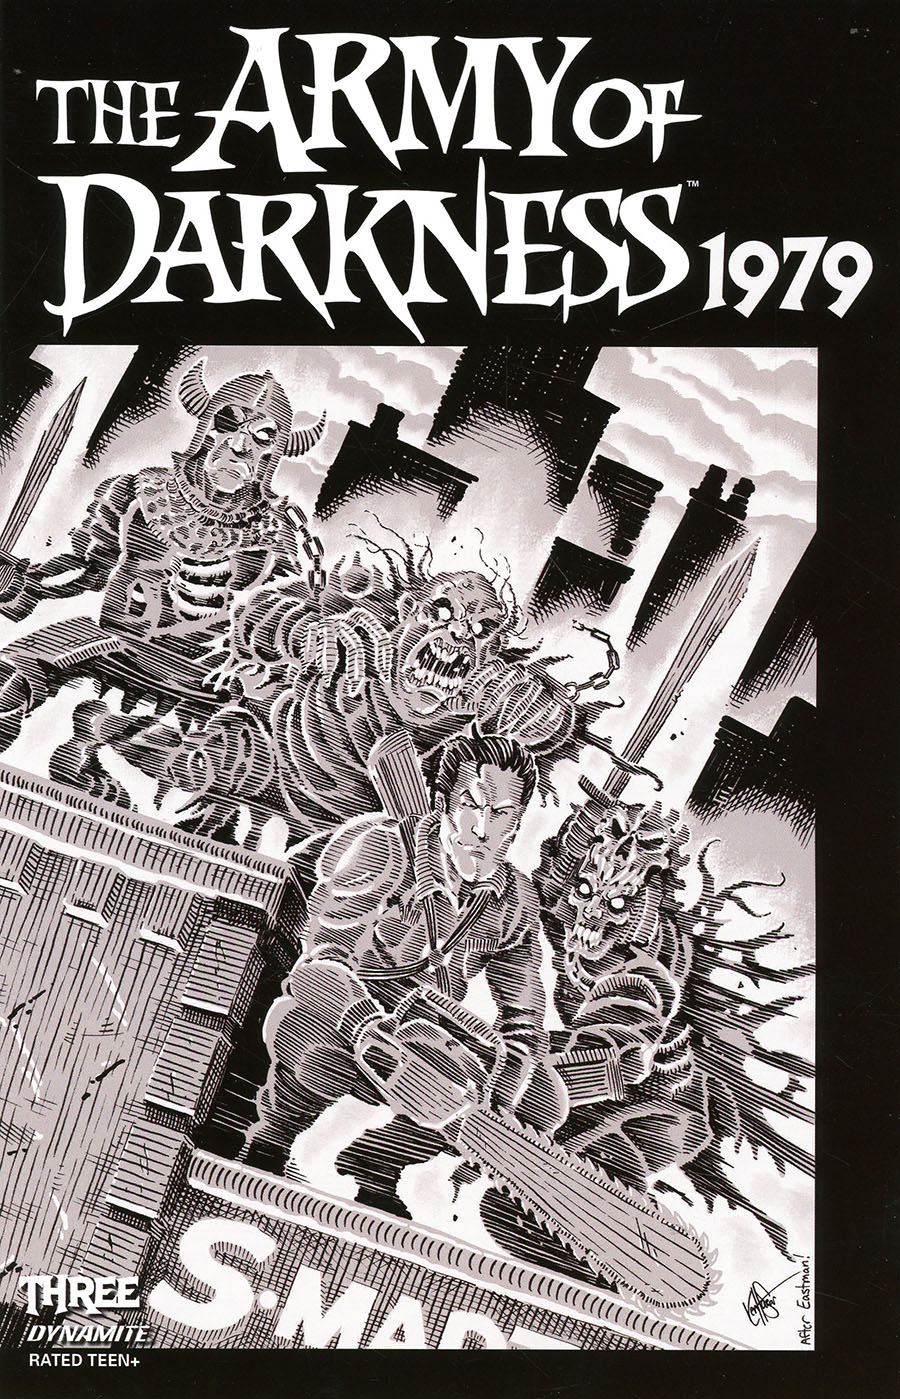 Army Of Darkness 1979 #3 Cover N Incentive Ken Haeser TMNT Homage Greyscale Cover